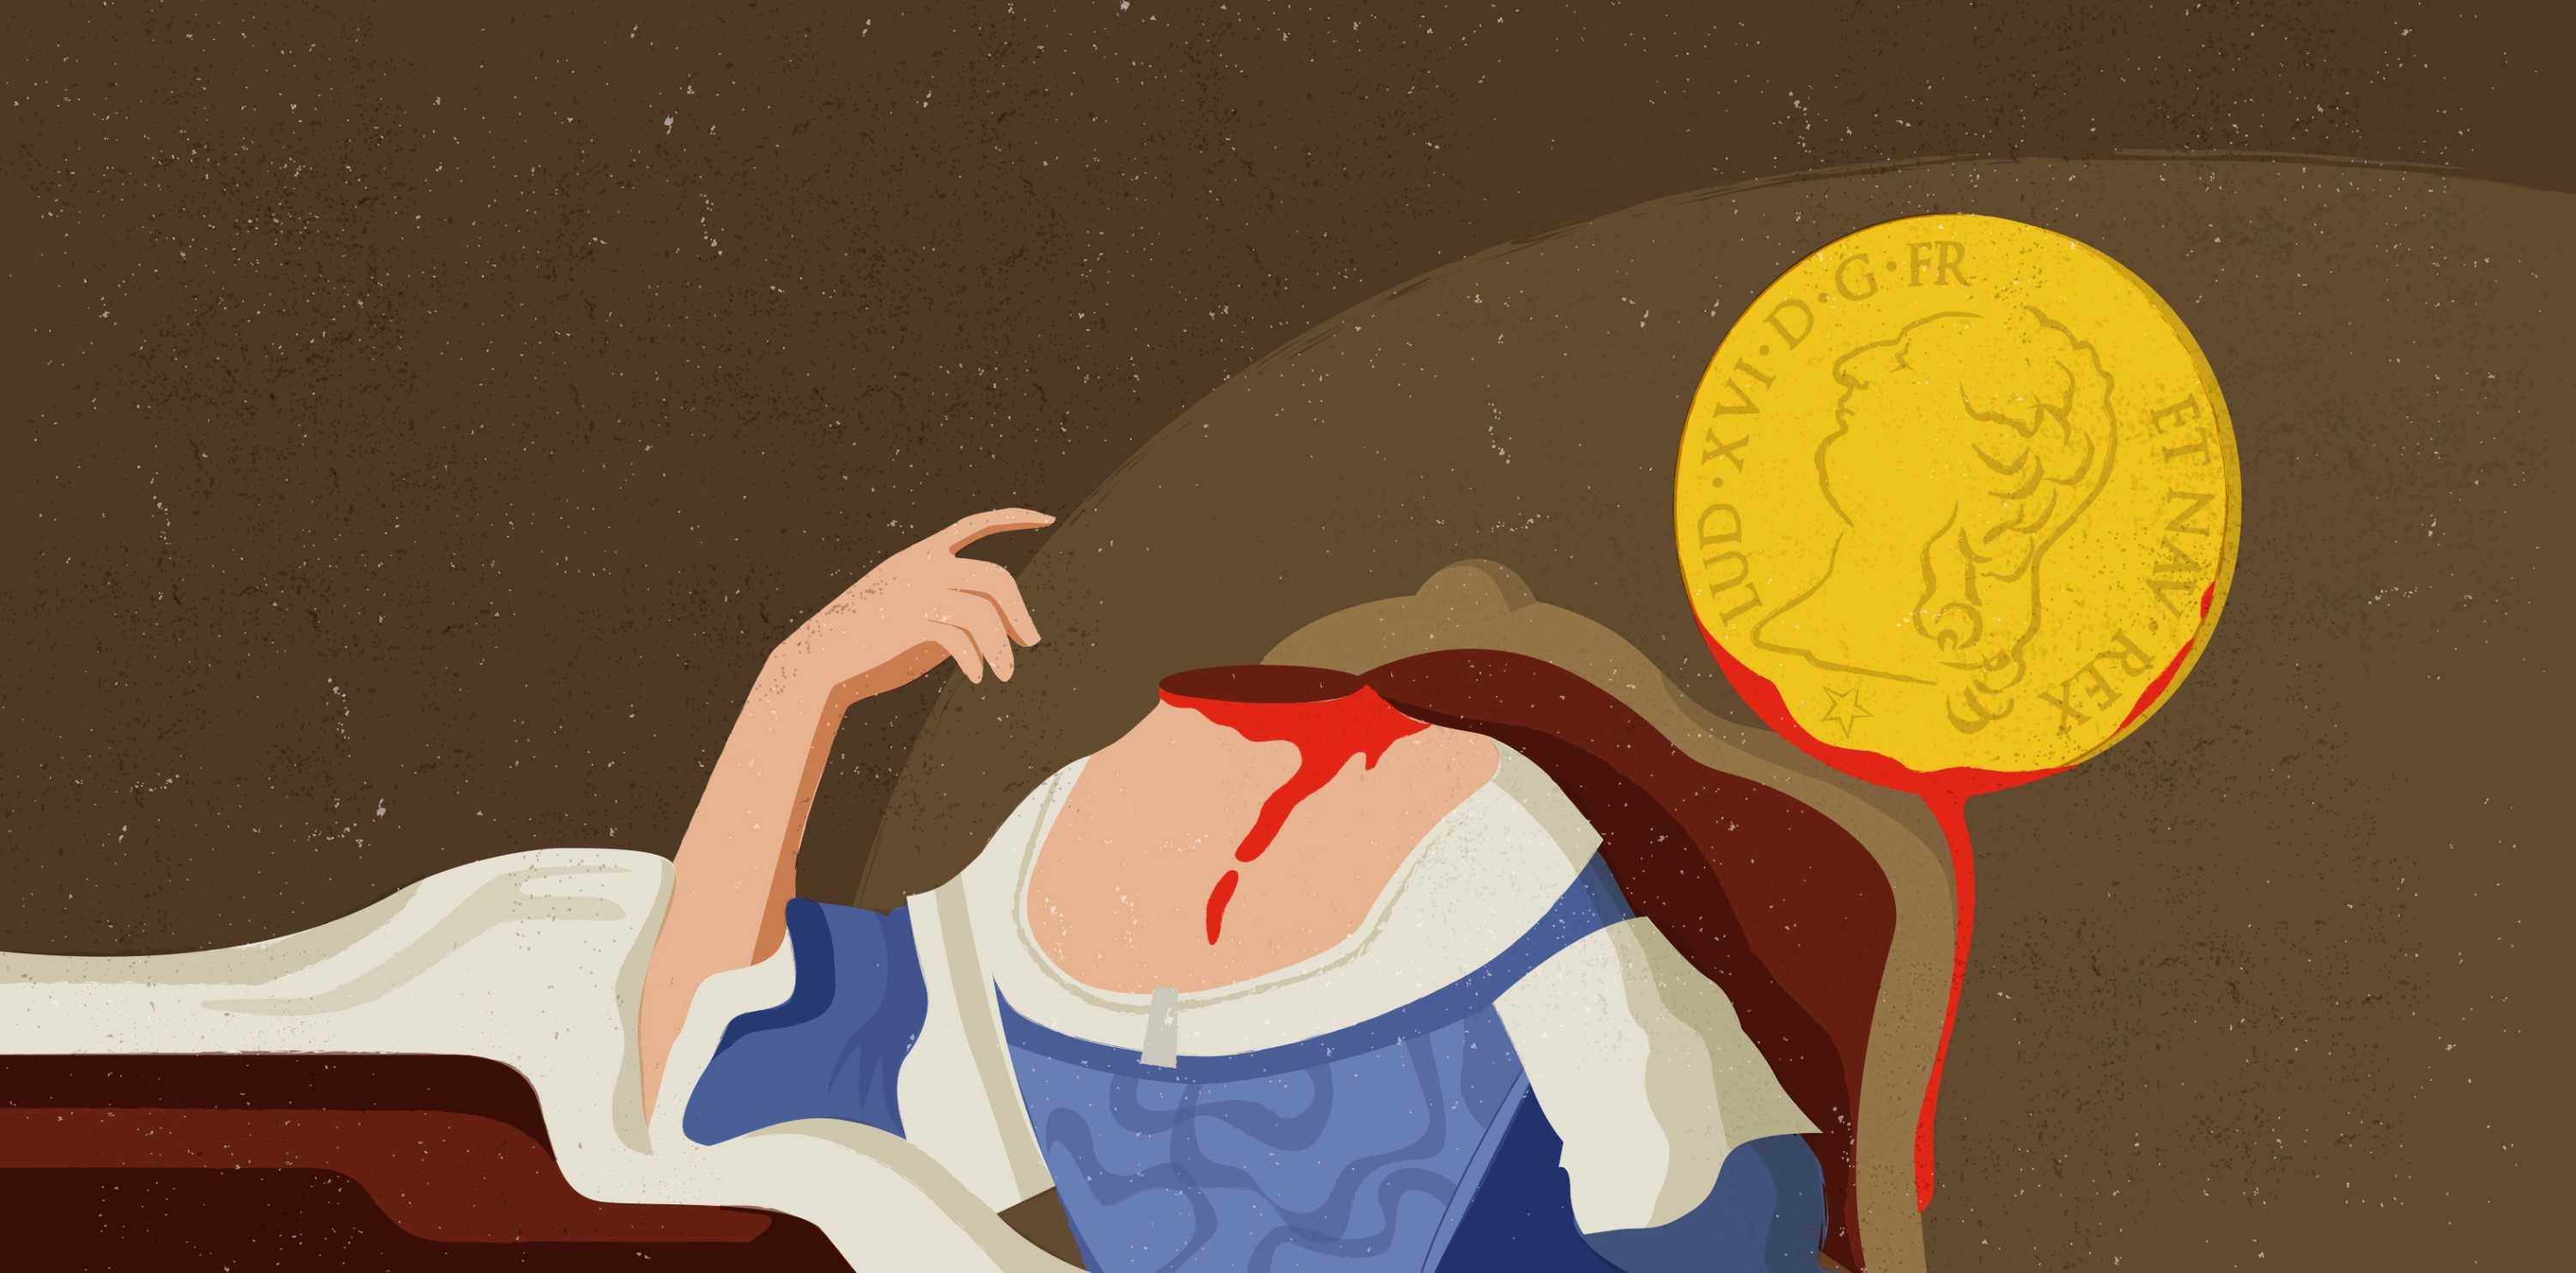 The Coin — the gold coin donation that kills Marie Antoinette